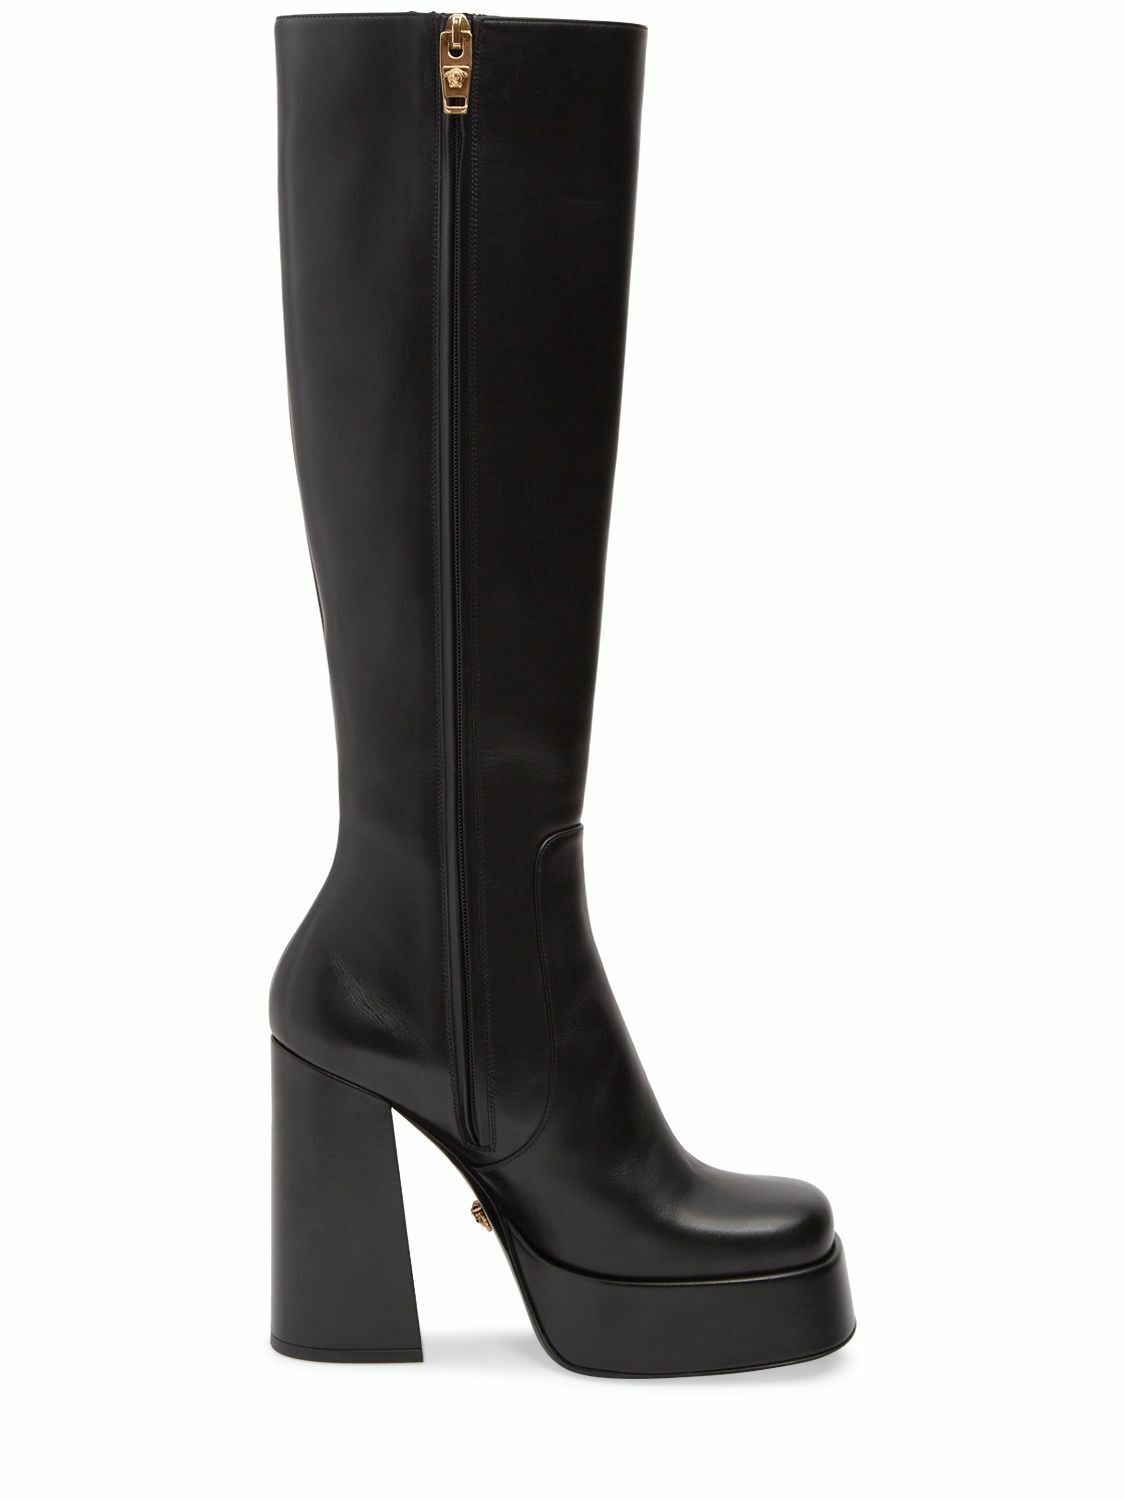 Photo: VERSACE - 120mm Leather Tall Boots